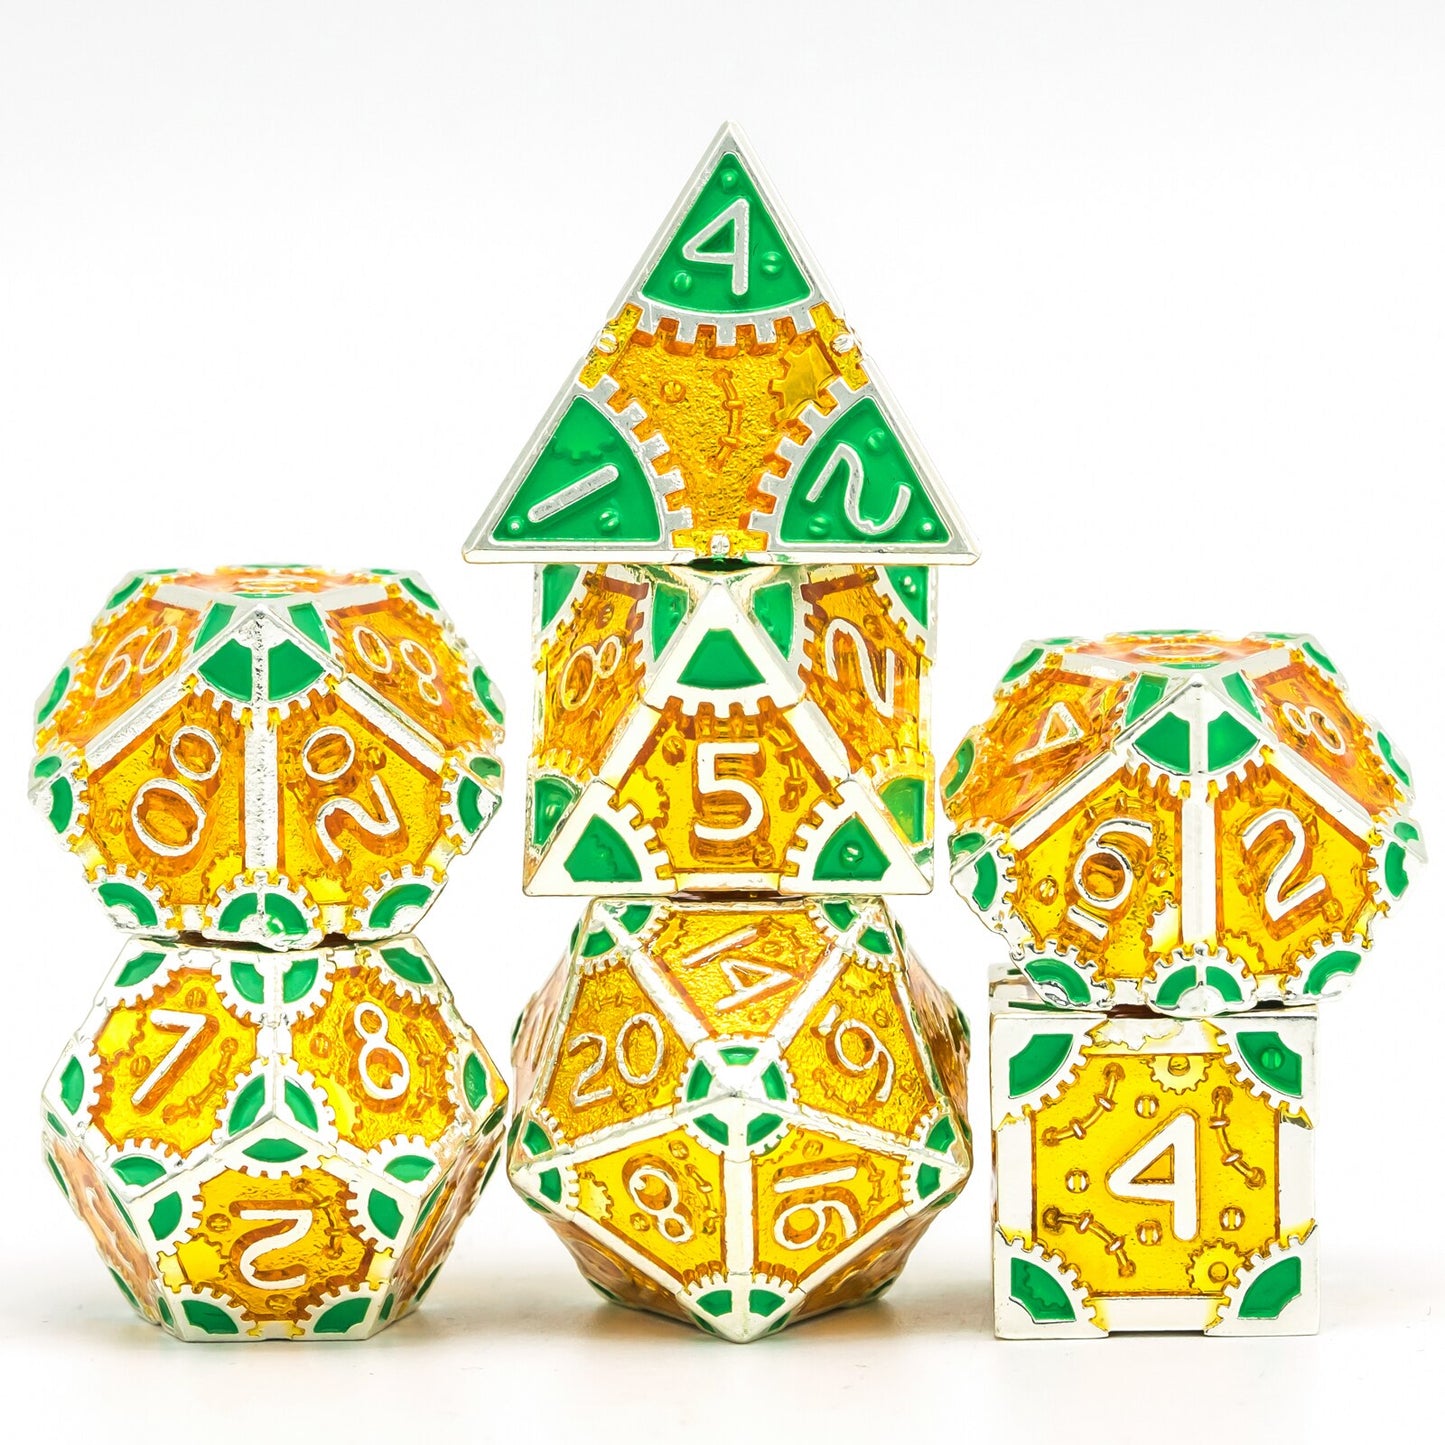 Yellow and green steampunk dice set